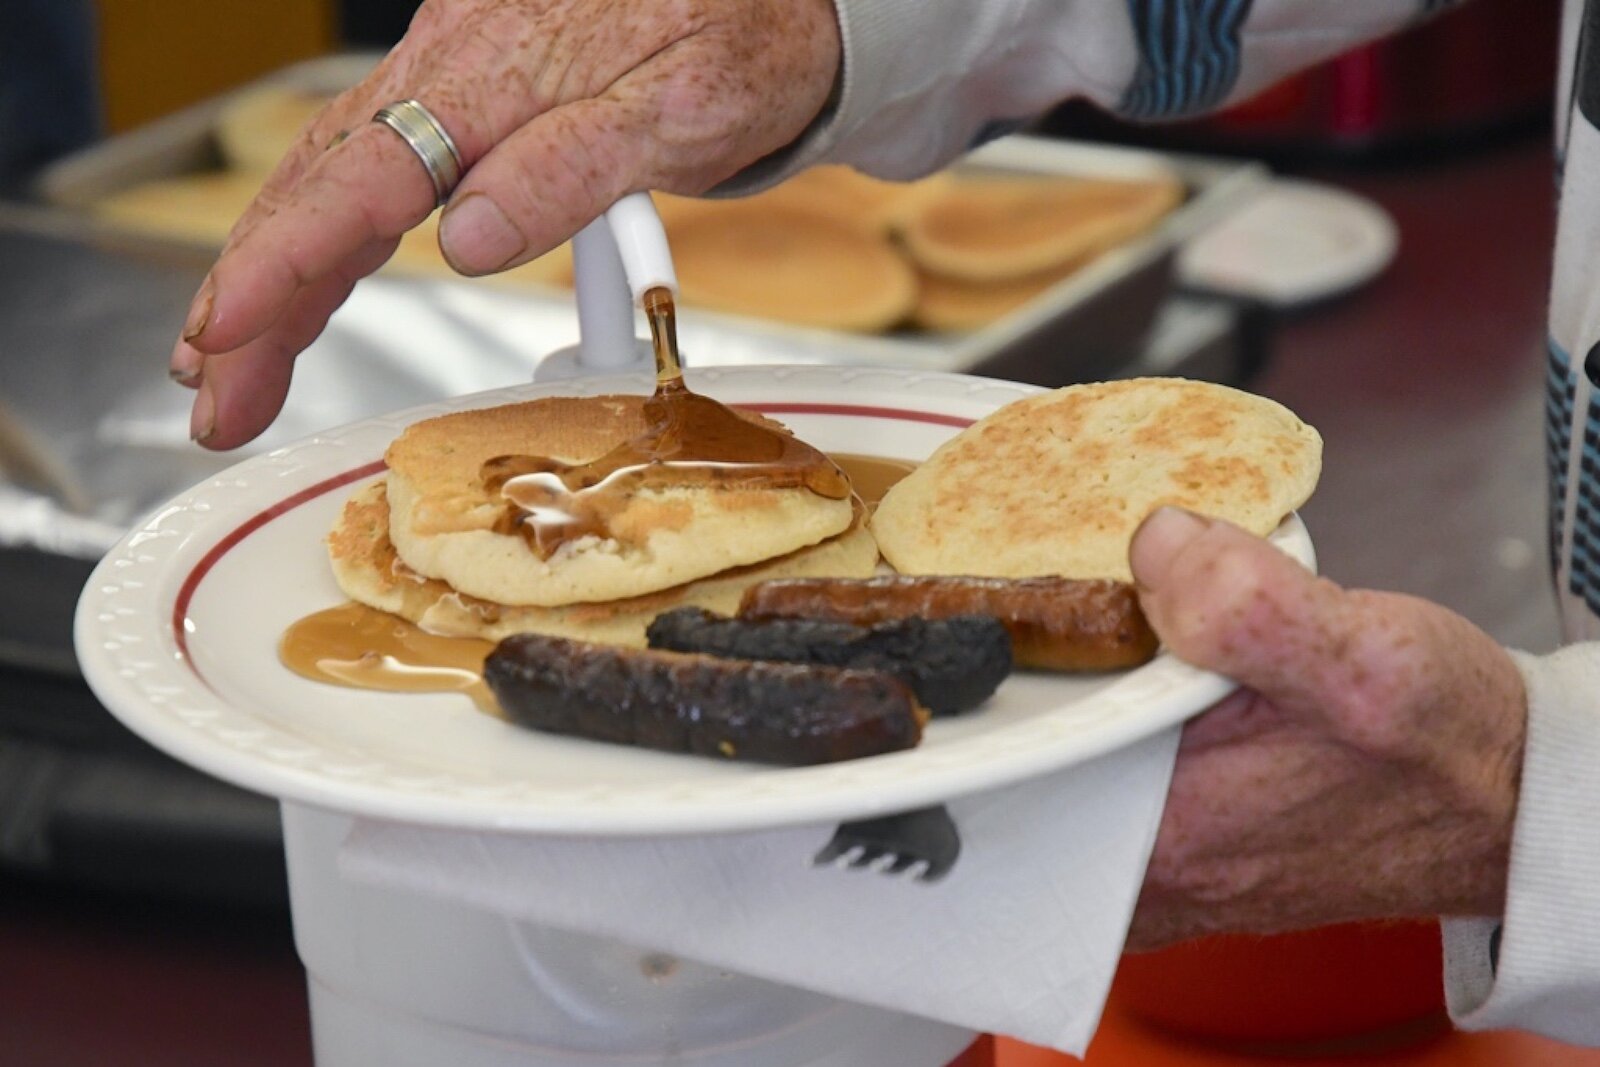 A customer pours syrup onto his pancakes at St. Thomas Episcopal Church’s breakfast program.